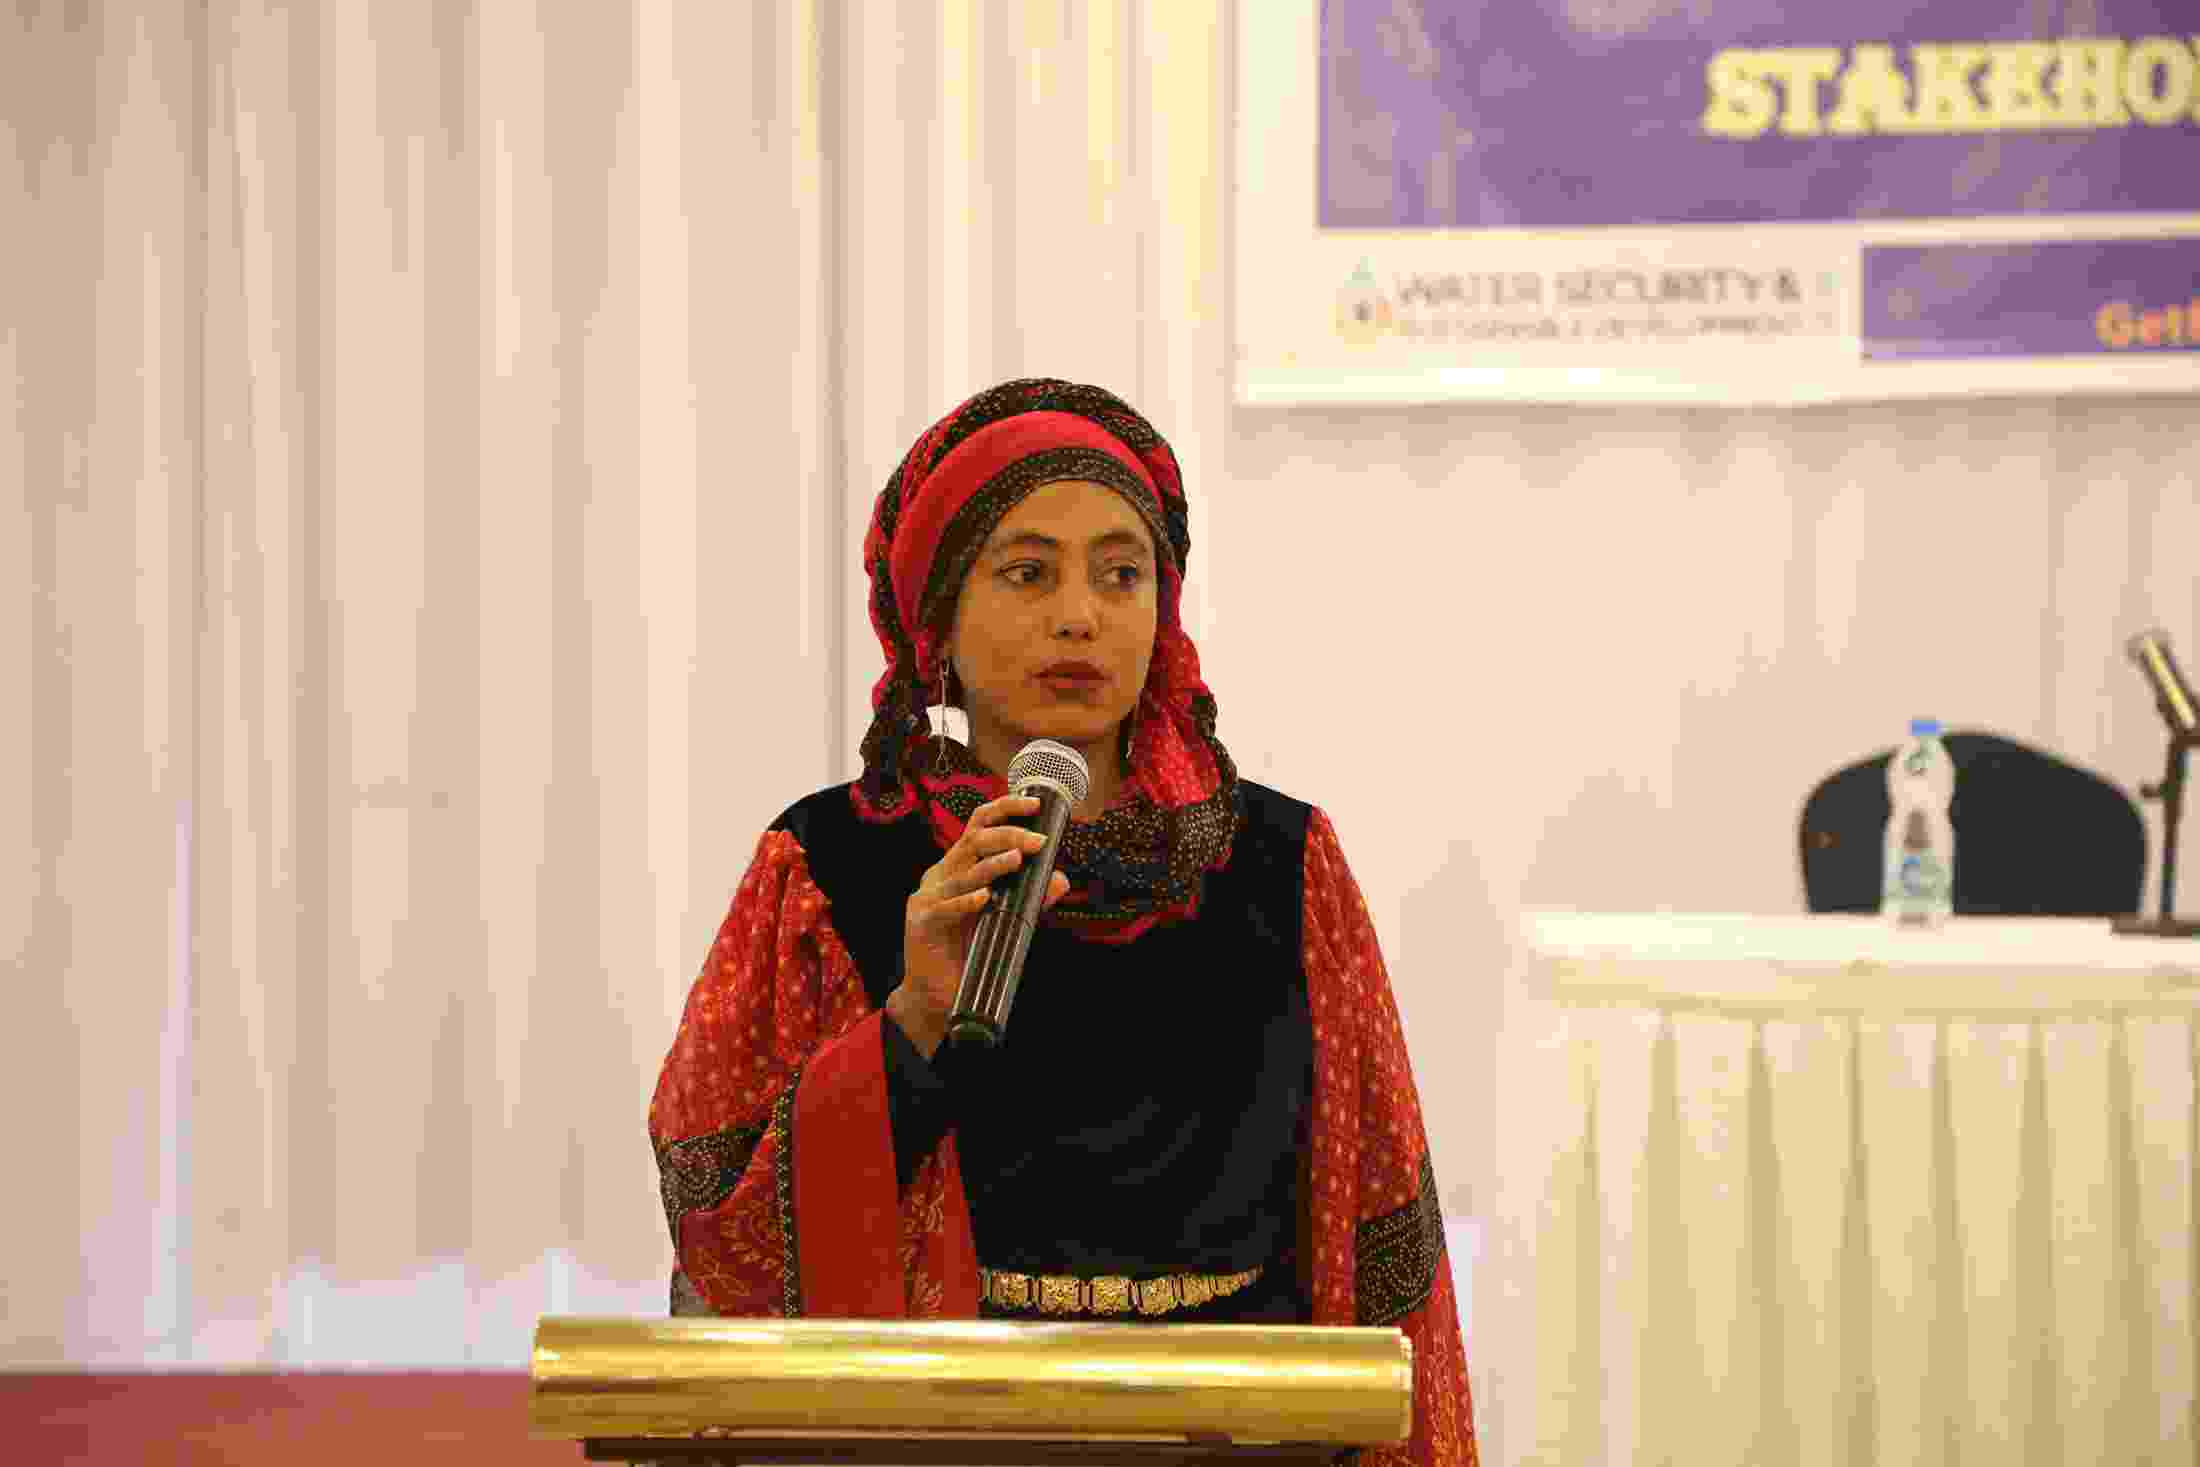 A woman dressed in black and red traditional clothing stands at a lectern and speaks to workshop participants